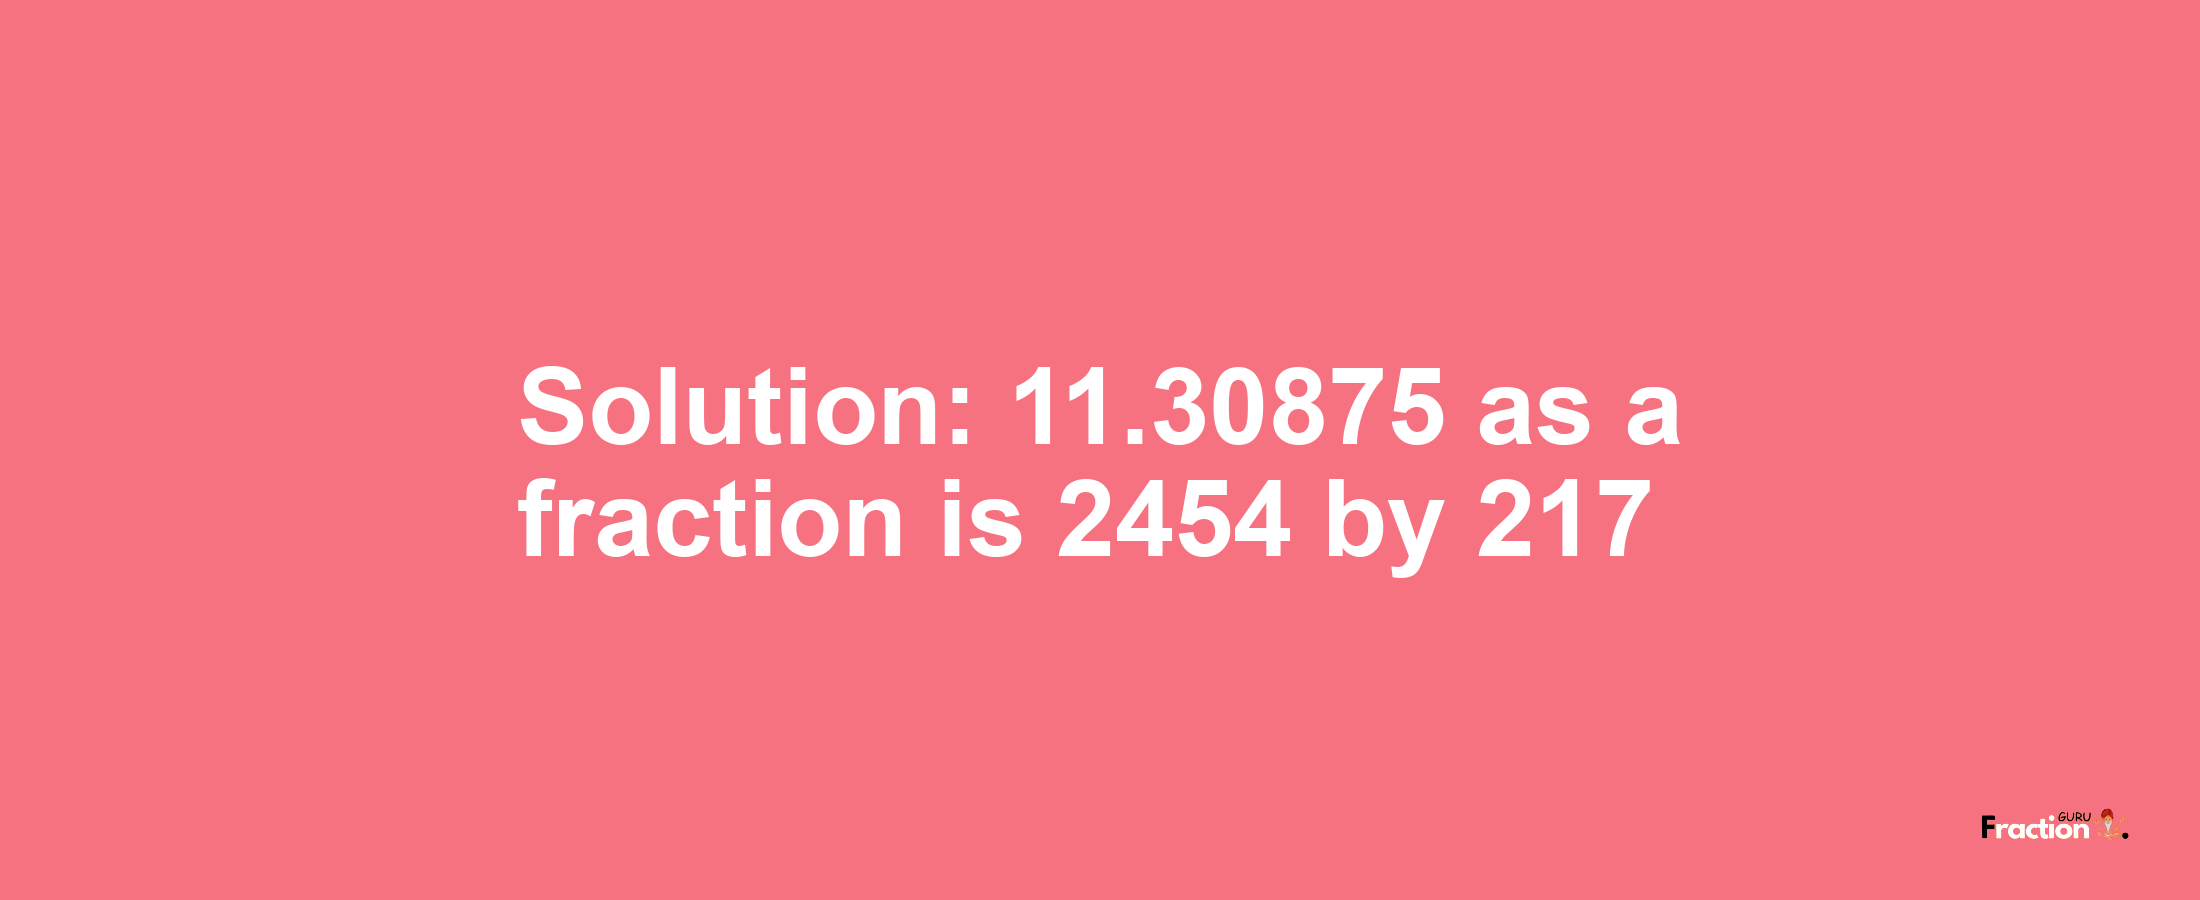 Solution:11.30875 as a fraction is 2454/217